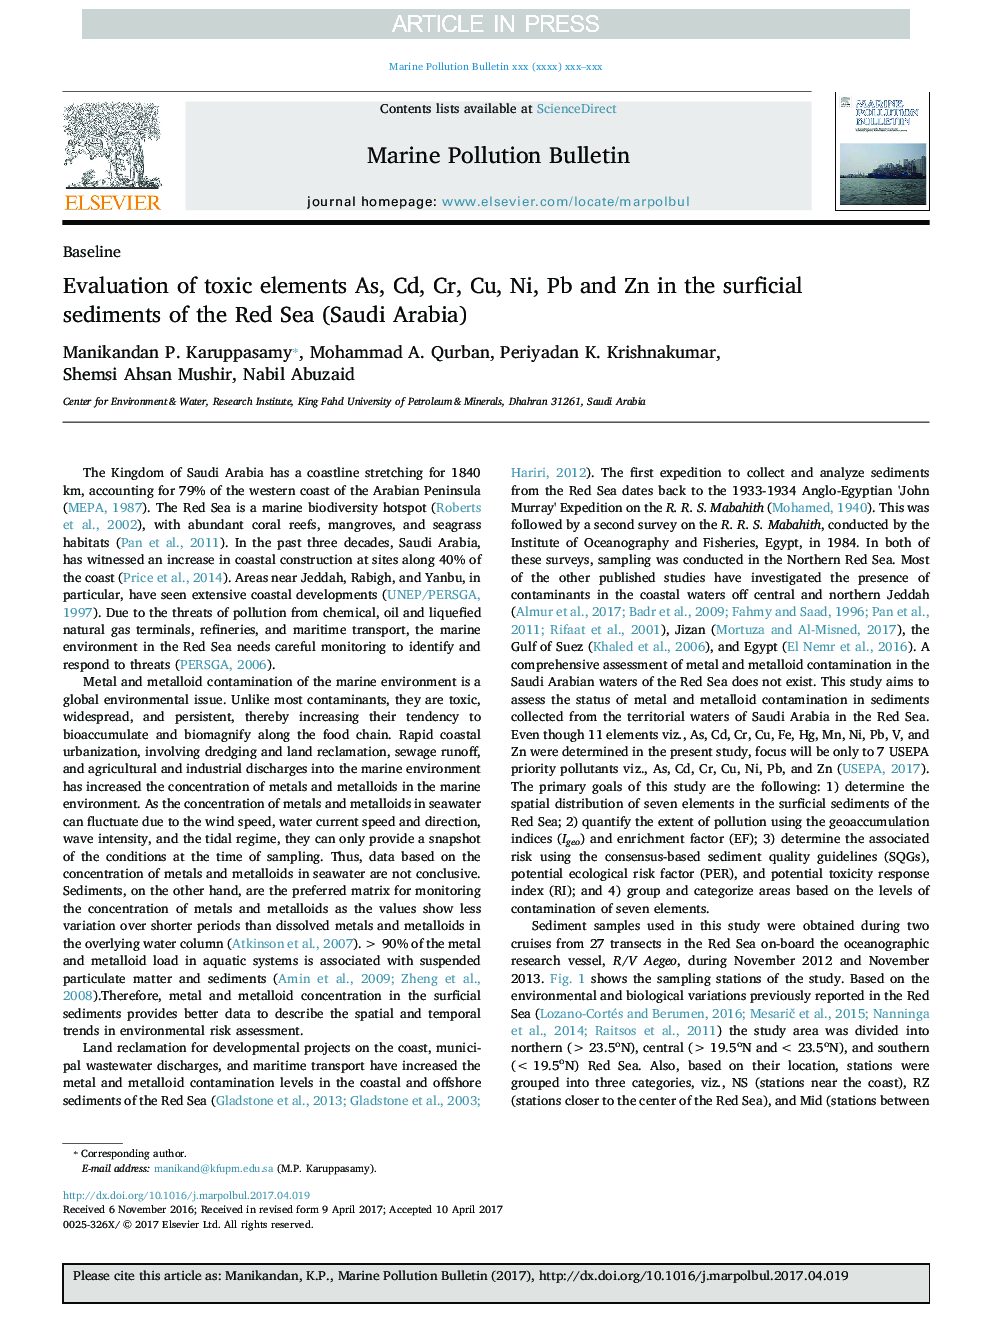 Evaluation of toxic elements As, Cd, Cr, Cu, Ni, Pb and Zn in the surficial sediments of the Red Sea (Saudi Arabia)